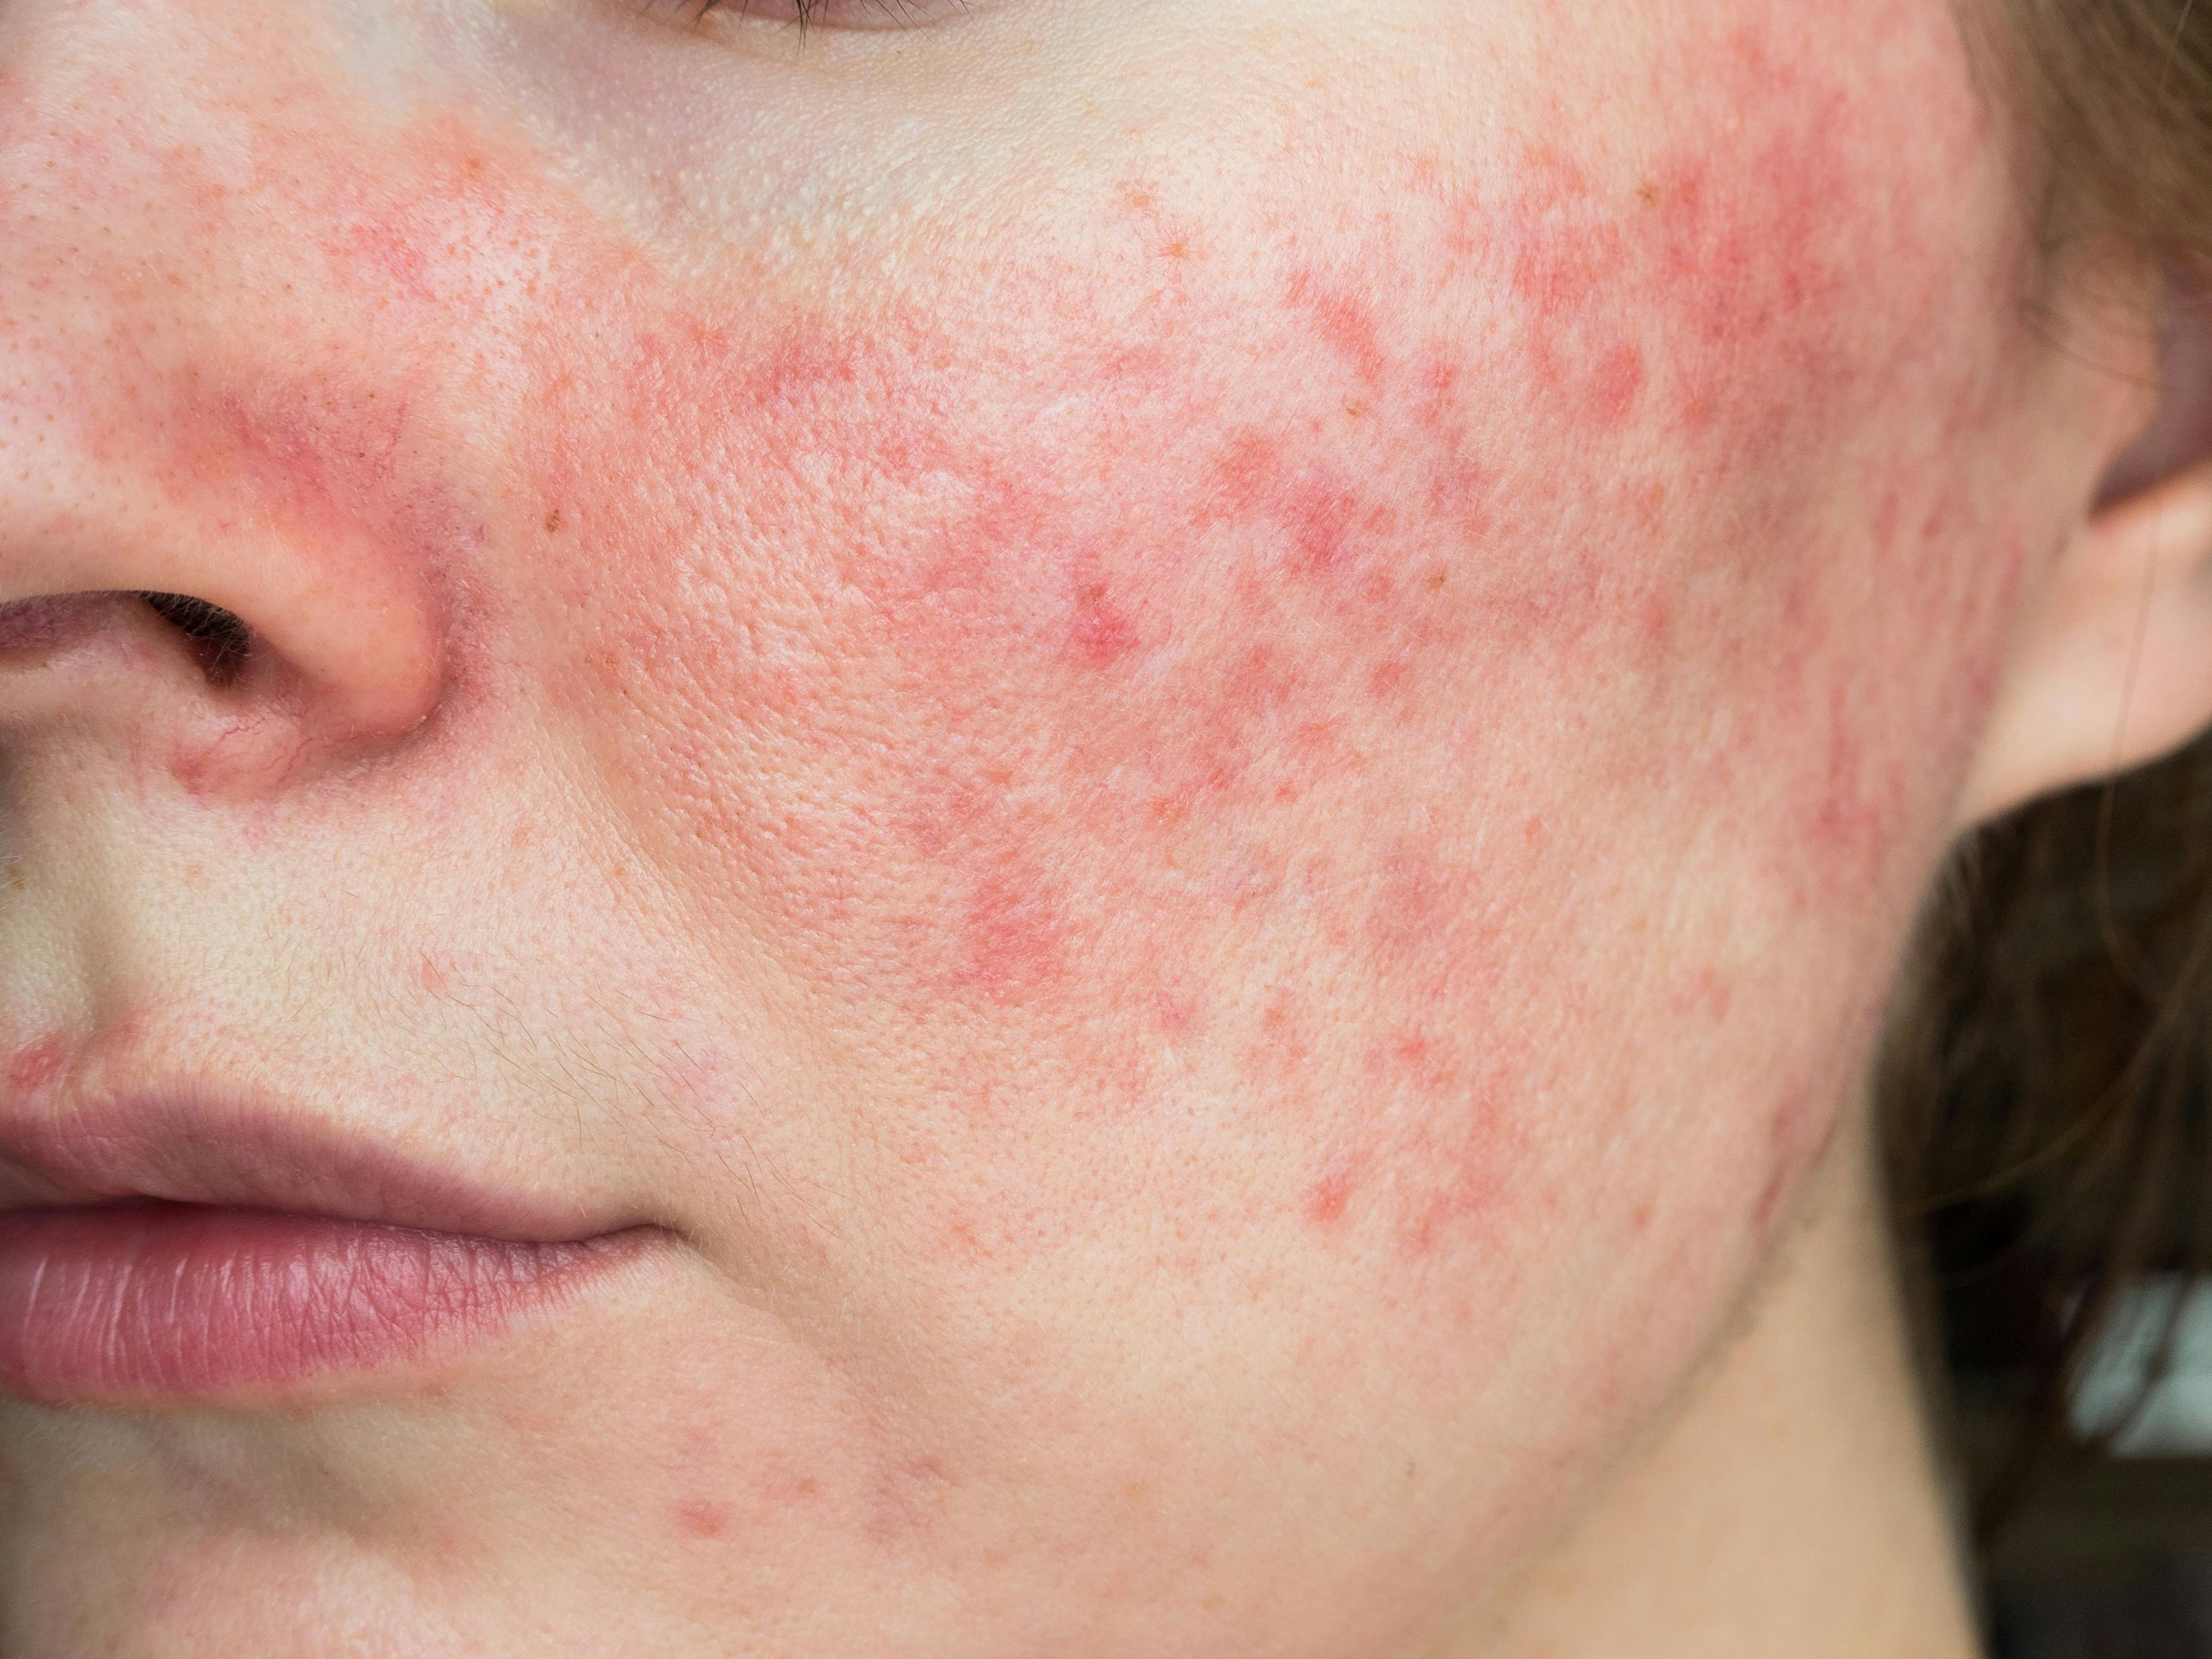 Low Levels of Serum GLA in Rosacea Negatively Associated With Erythema, Anxiety, and Depression